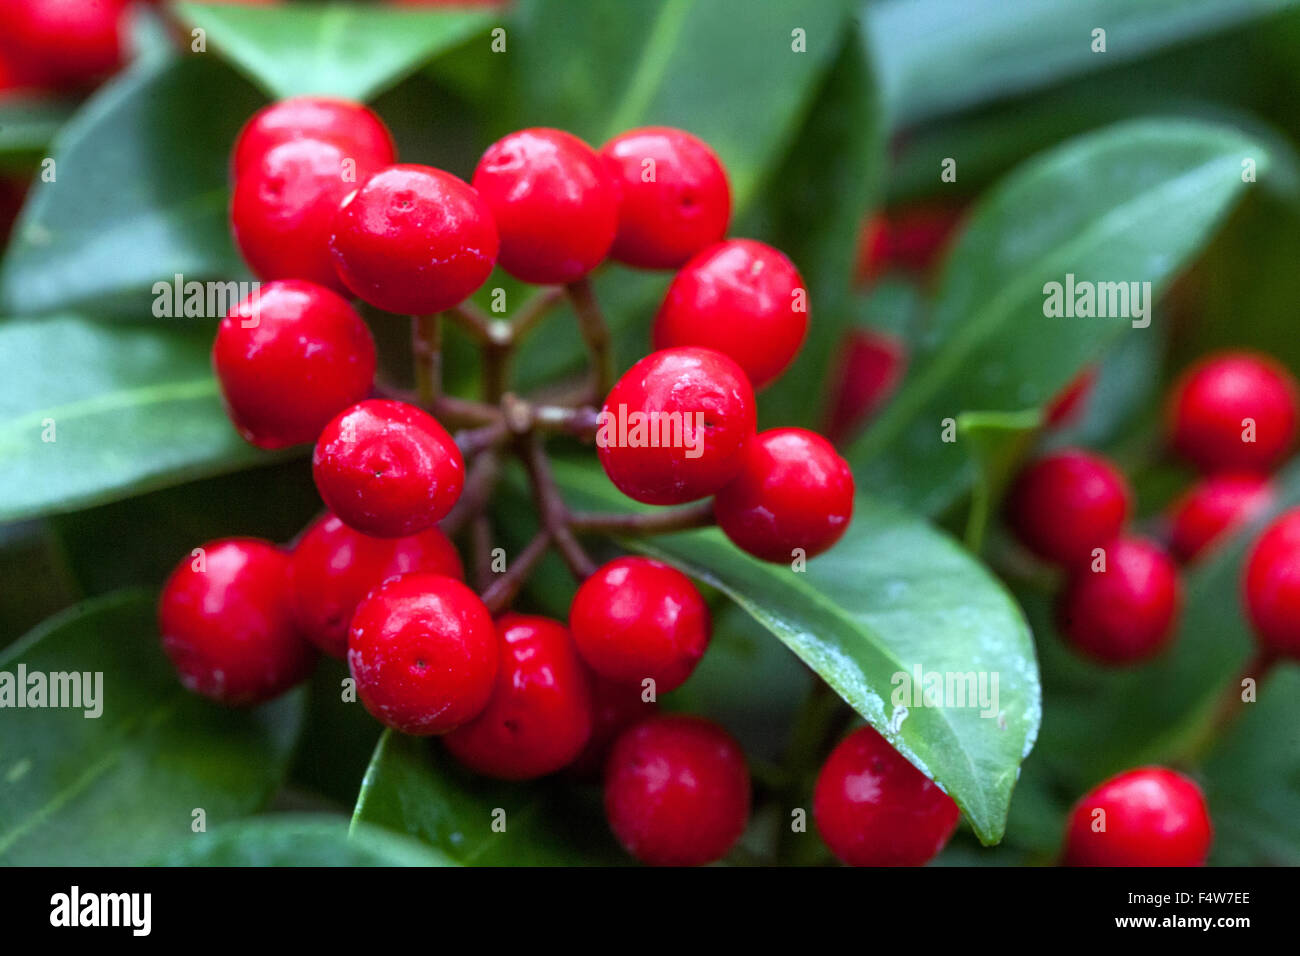 Skimmia japonica red berries close up Stock Photo